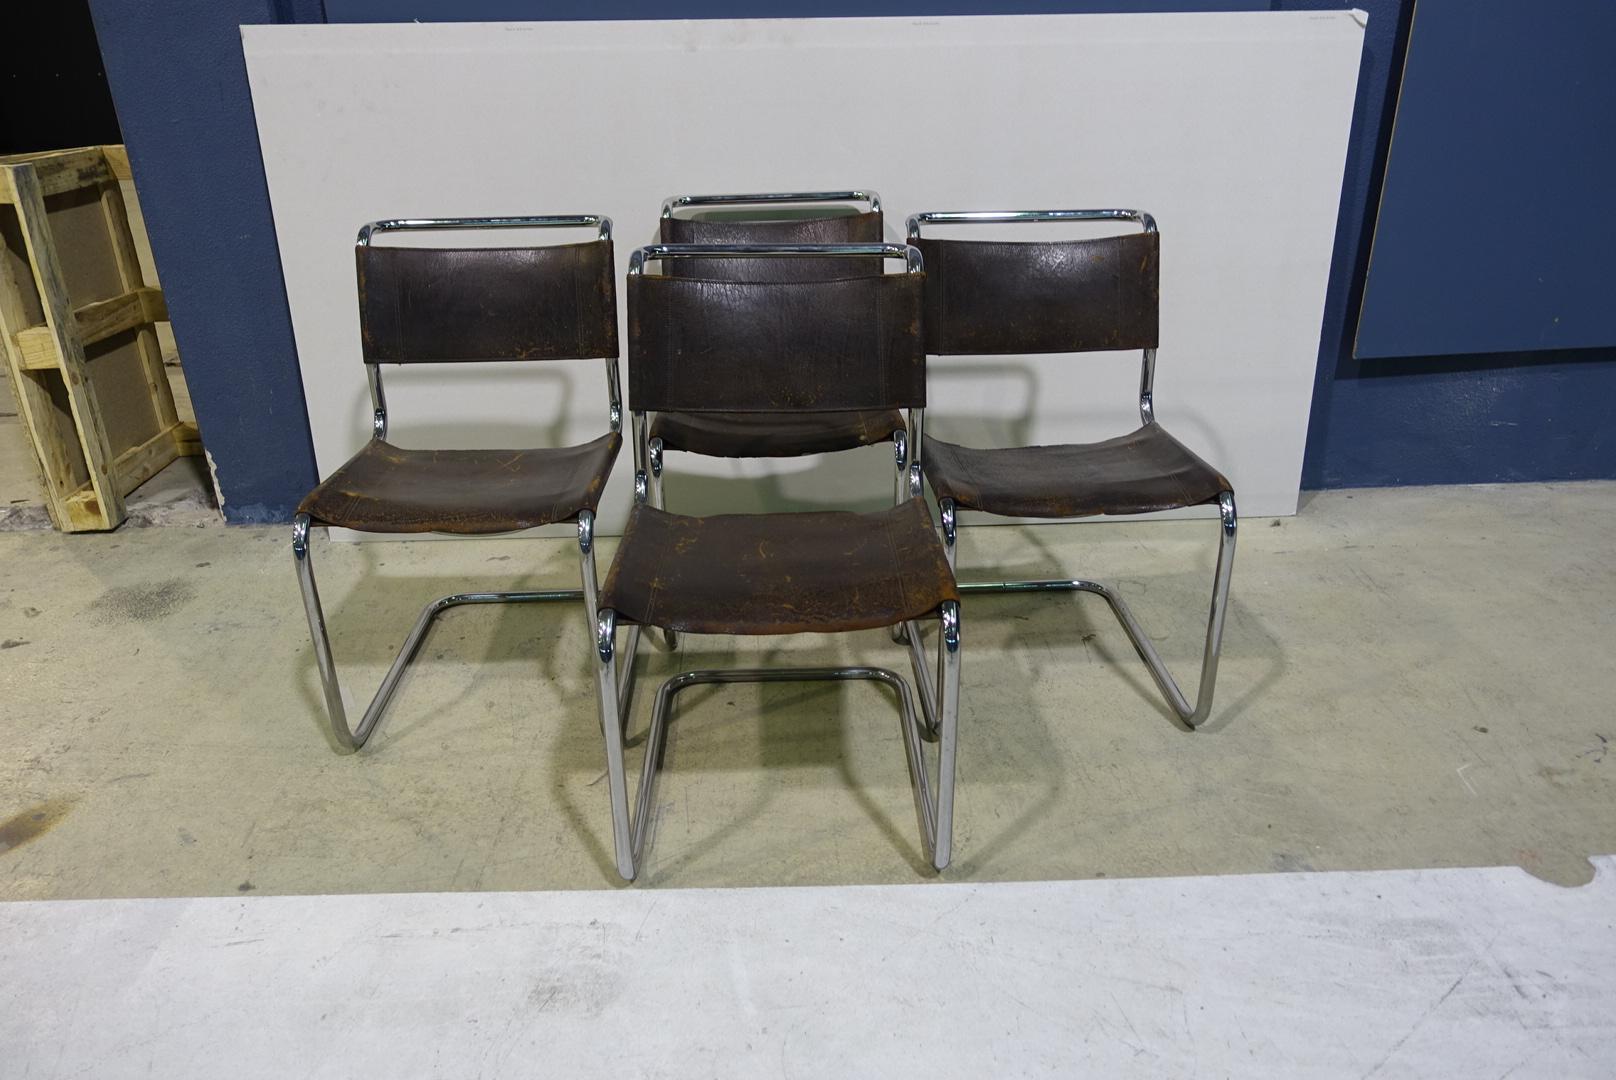 These chairs are the first cantilever chairs in furniture history. They were used for the first time in 1927 in the Weissenhof-Siedlung in Stuttgart. Starting in 1925, Mart Stam experimented with gas pipes that he connected with flanges and